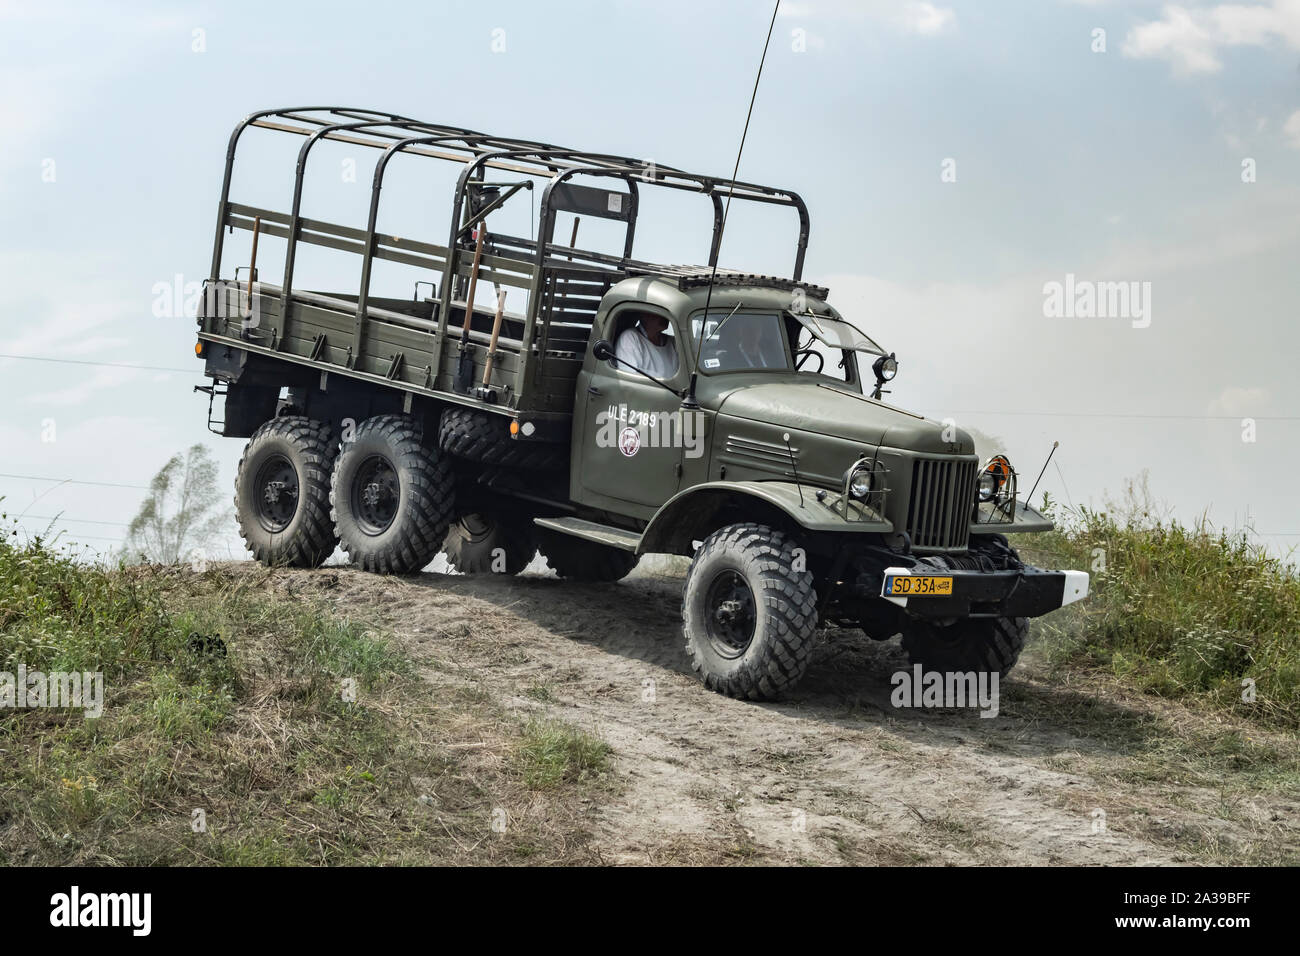 T he Soviet off-road truck Zil-157 on the hill during Military Vehicles Rally 'Operation Tempest' in Trzebinia, Poland Stock Photo